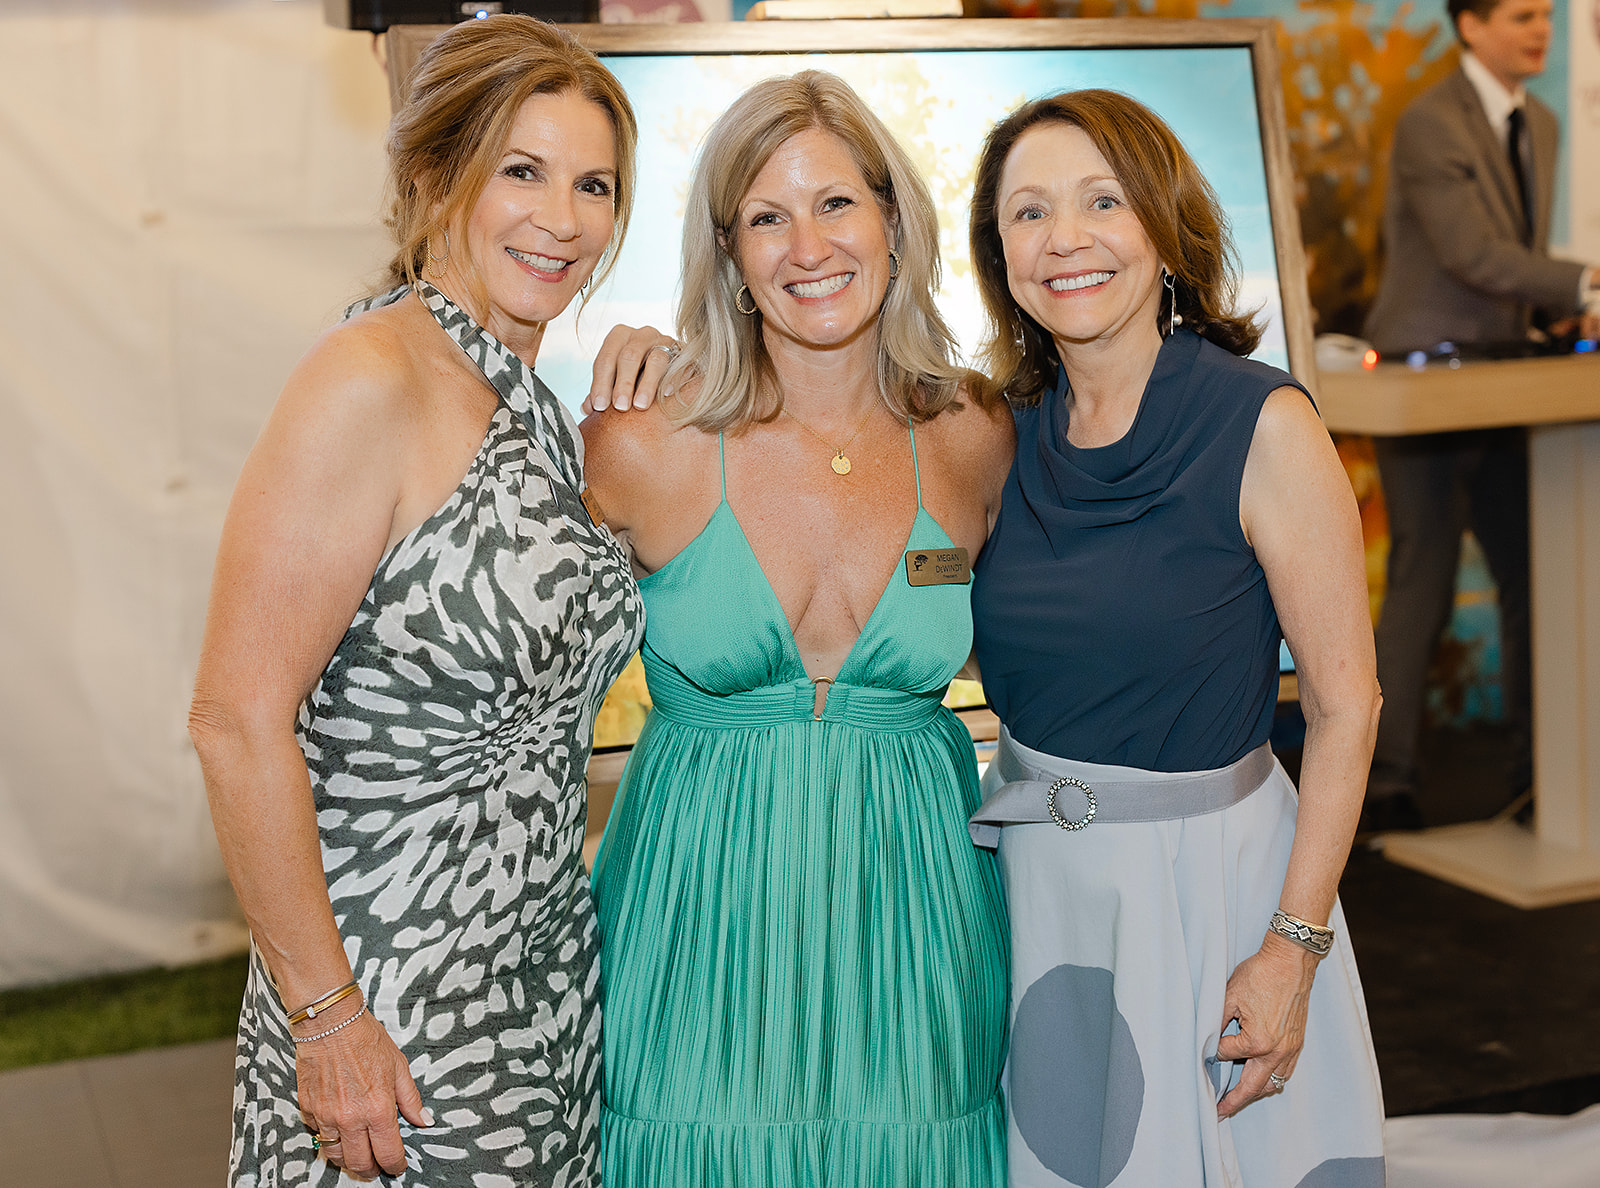  2023 Dart for Art Co-Chairs, Kathleen Davis (left) and Karen Quenneville (right) with Crooked Tree Arts Center President, Megan DeWindt (center).